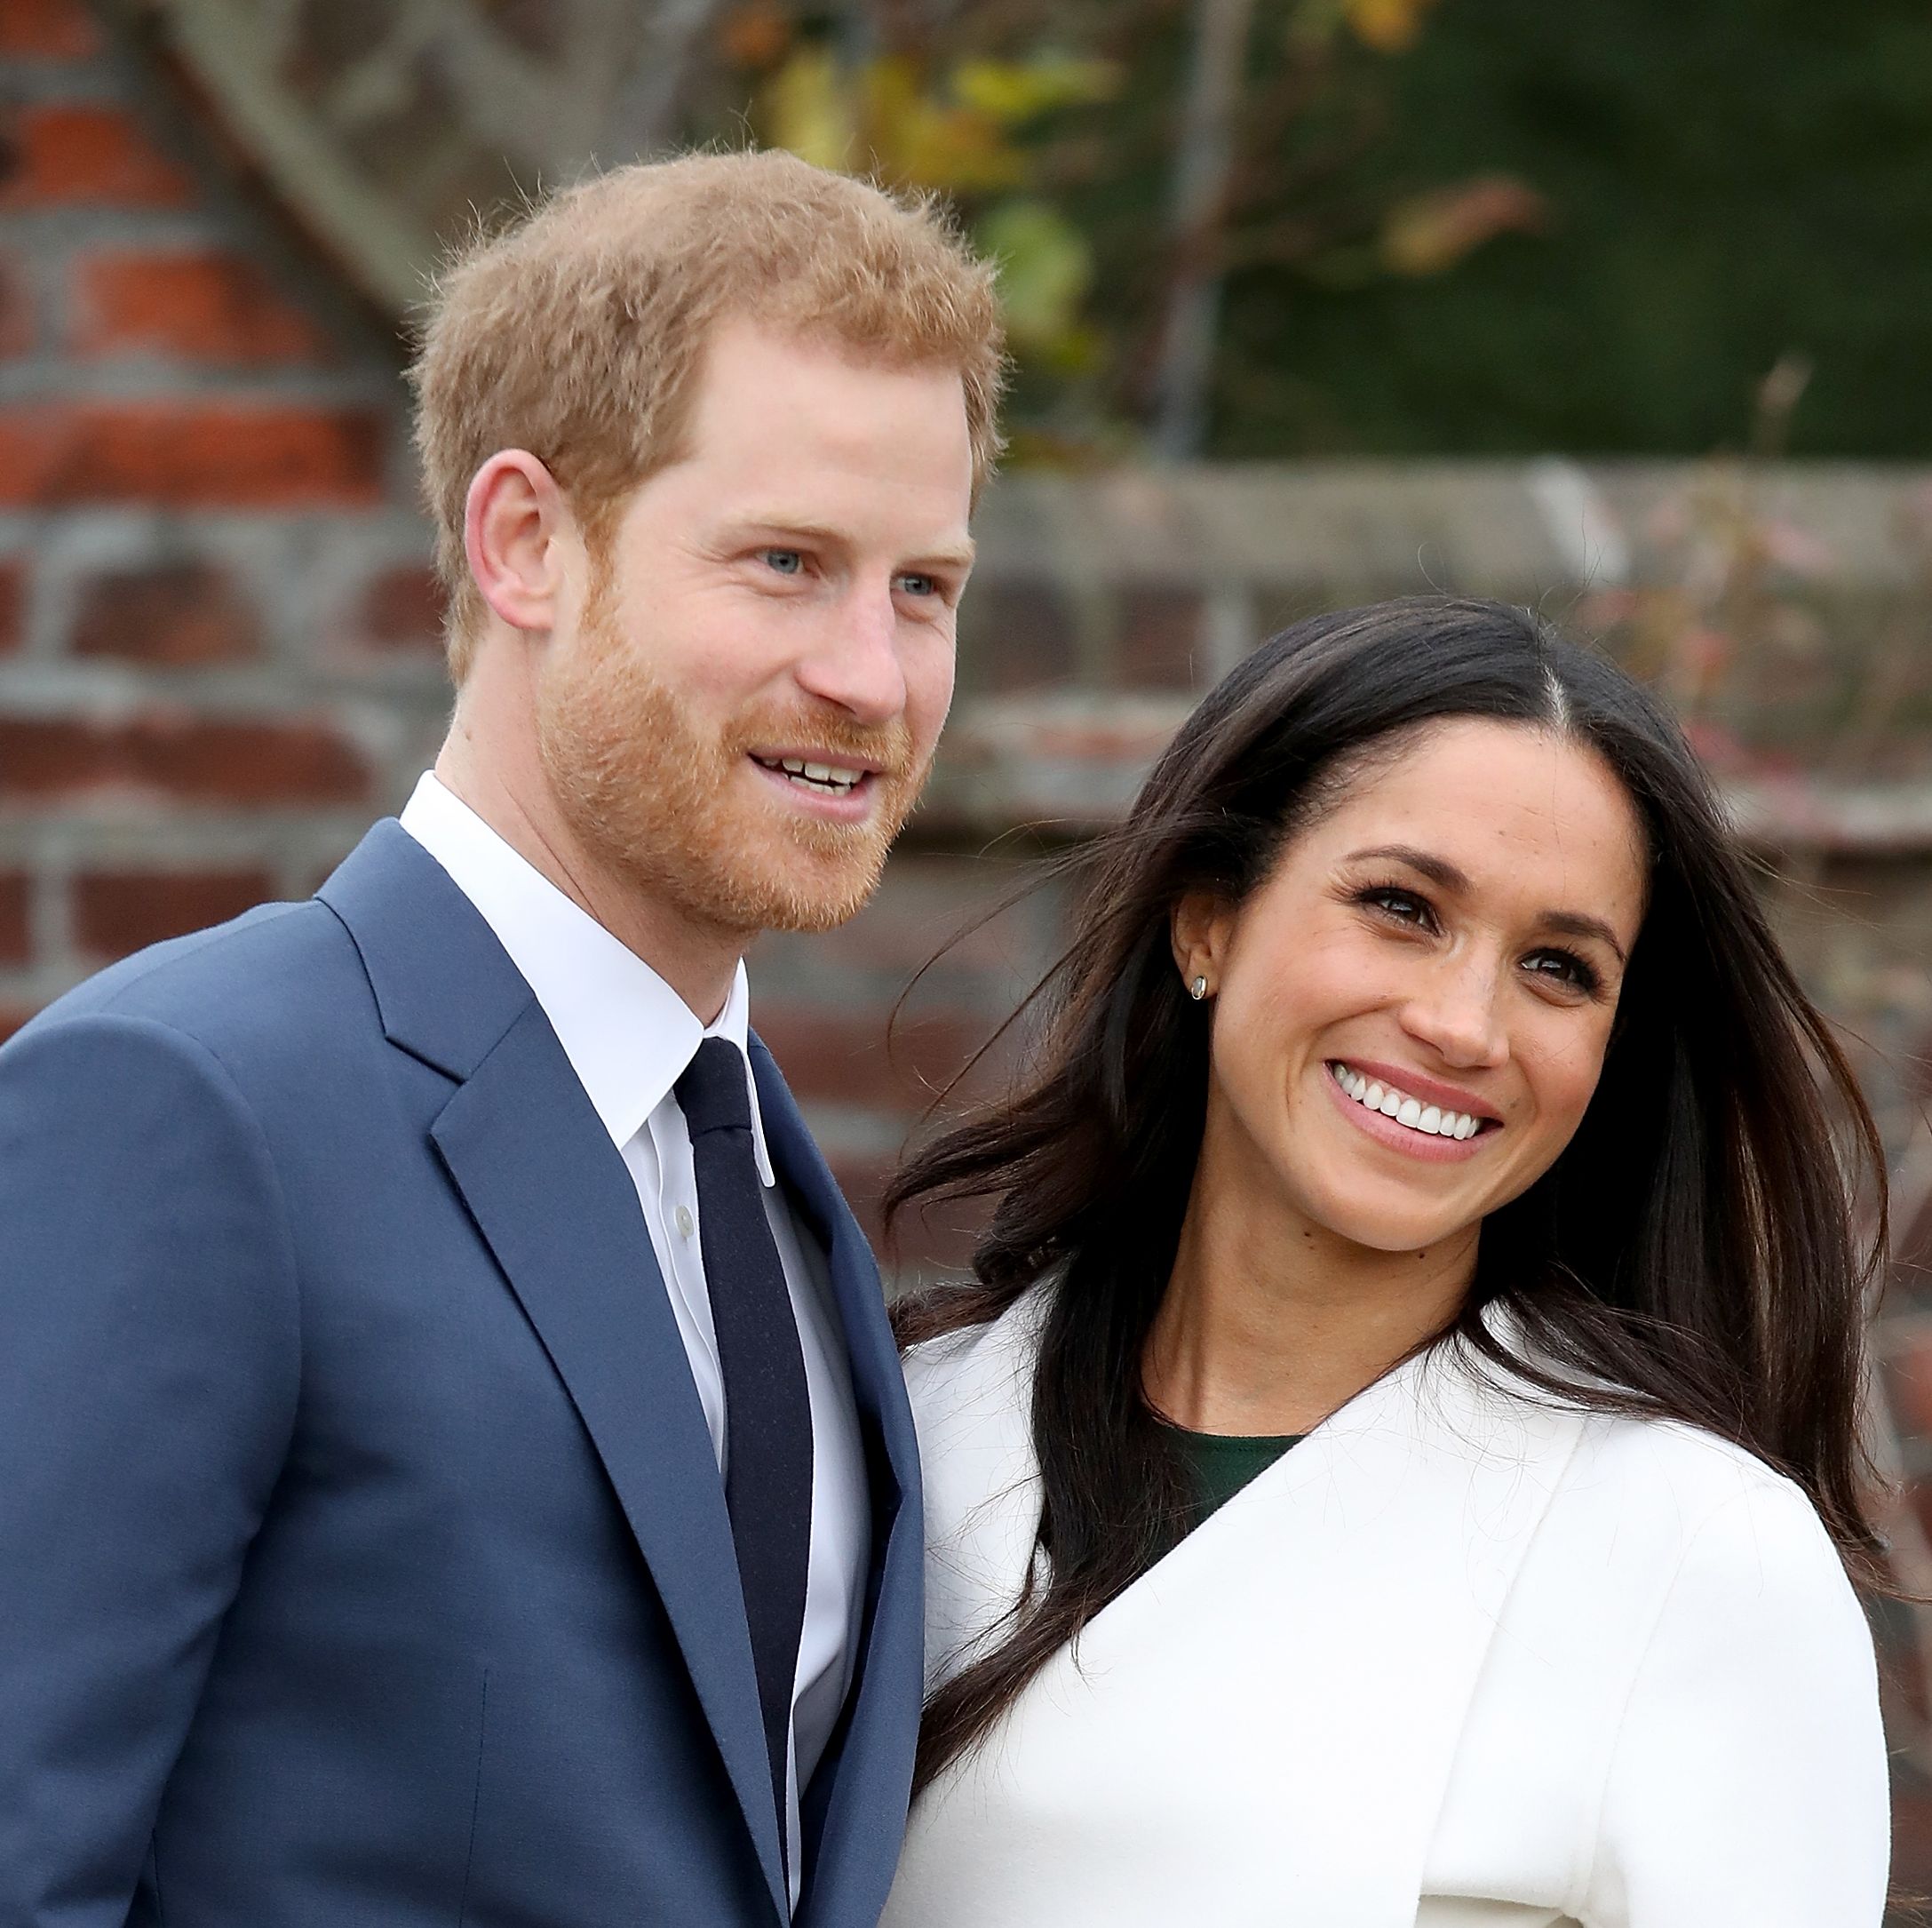 Prince Harry And Meghan Markle Always Wanted Their Children To Be Prince And Princess